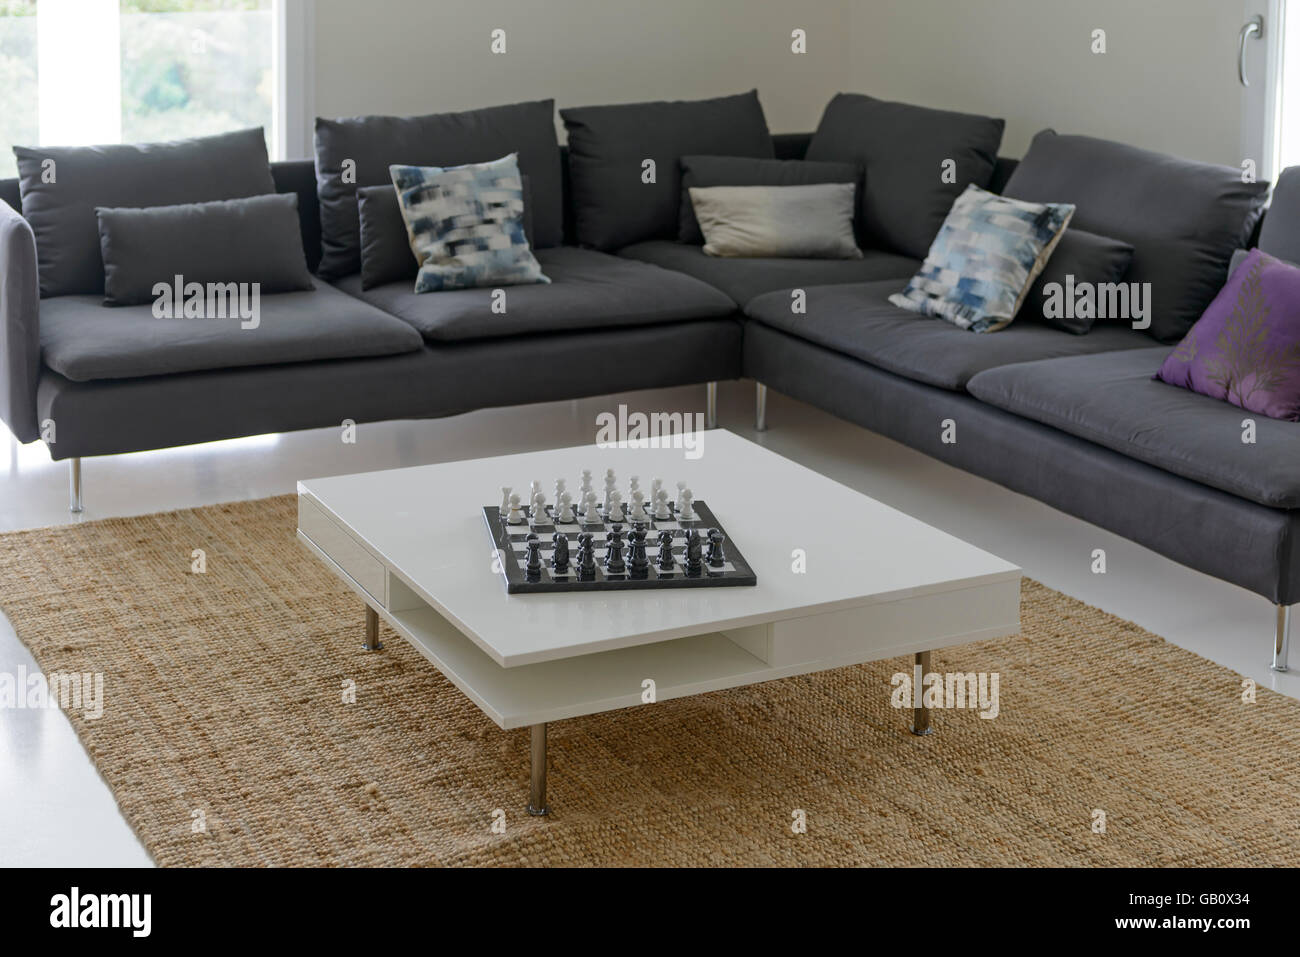 Living room with a big L shaped sofa and a chess board on the center table Stock Photo